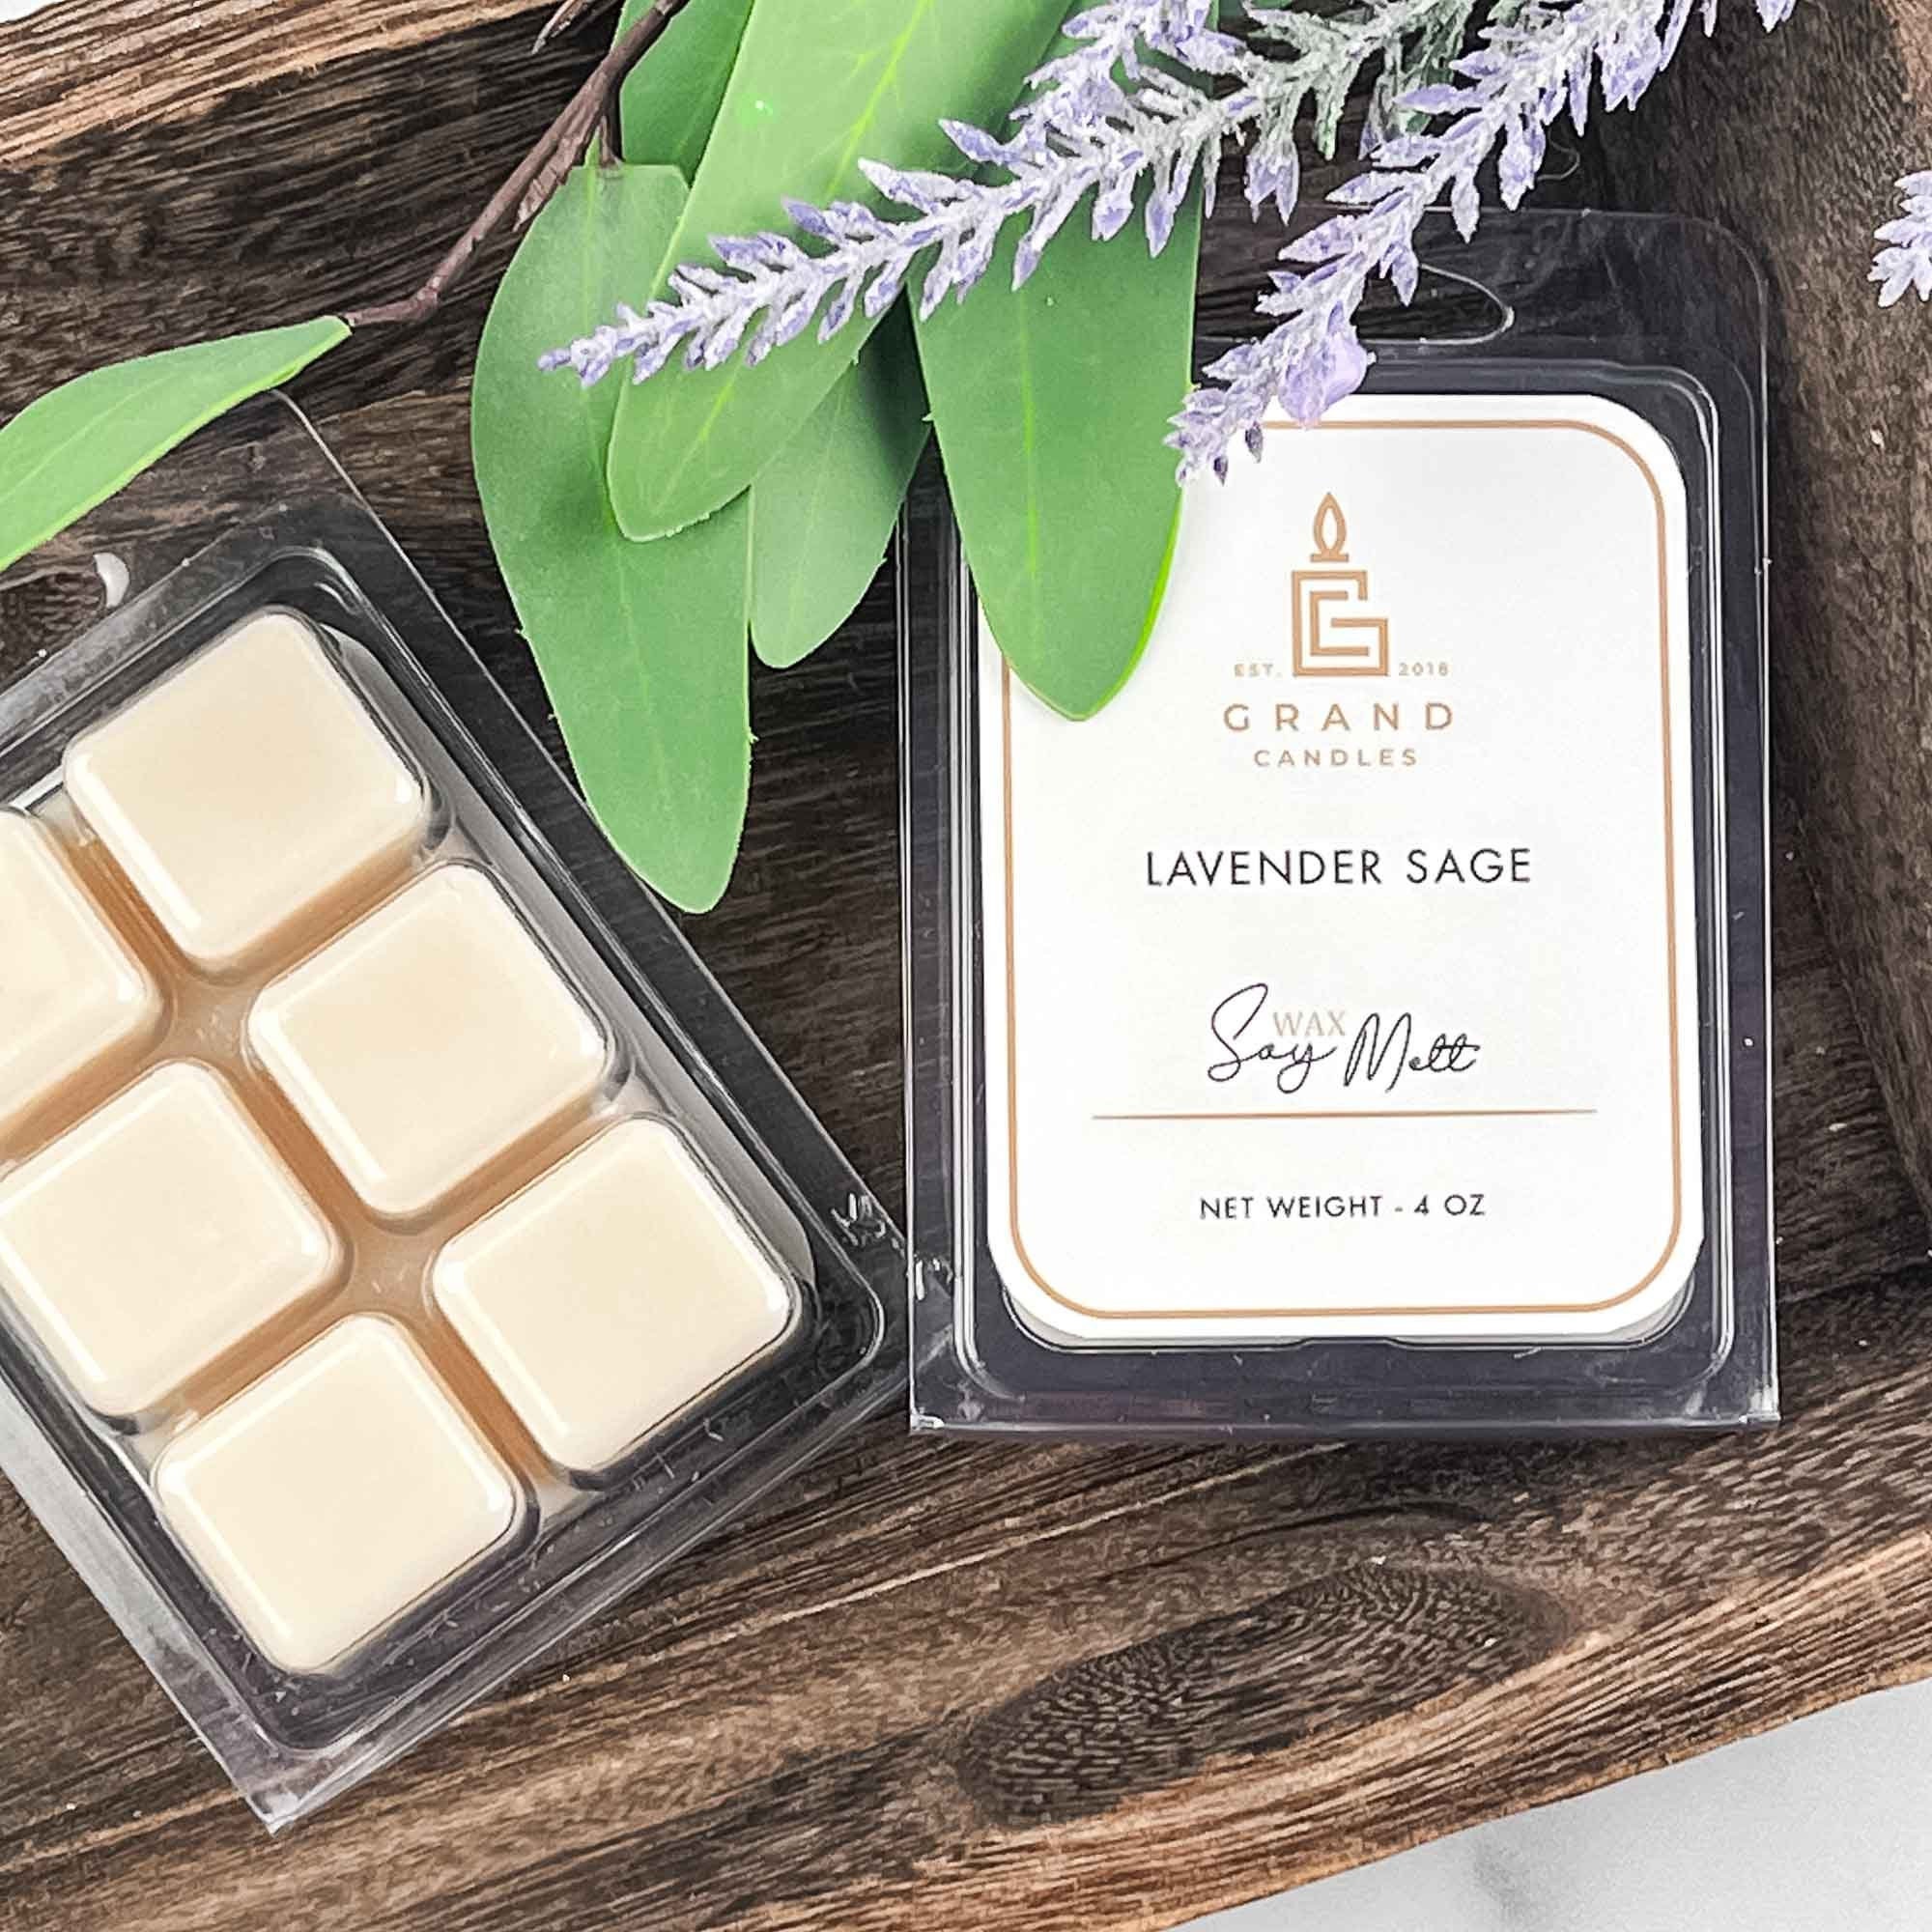 Lavender Sage Wax Melt, Scented Wax for Wax Warmer, Hand Poured